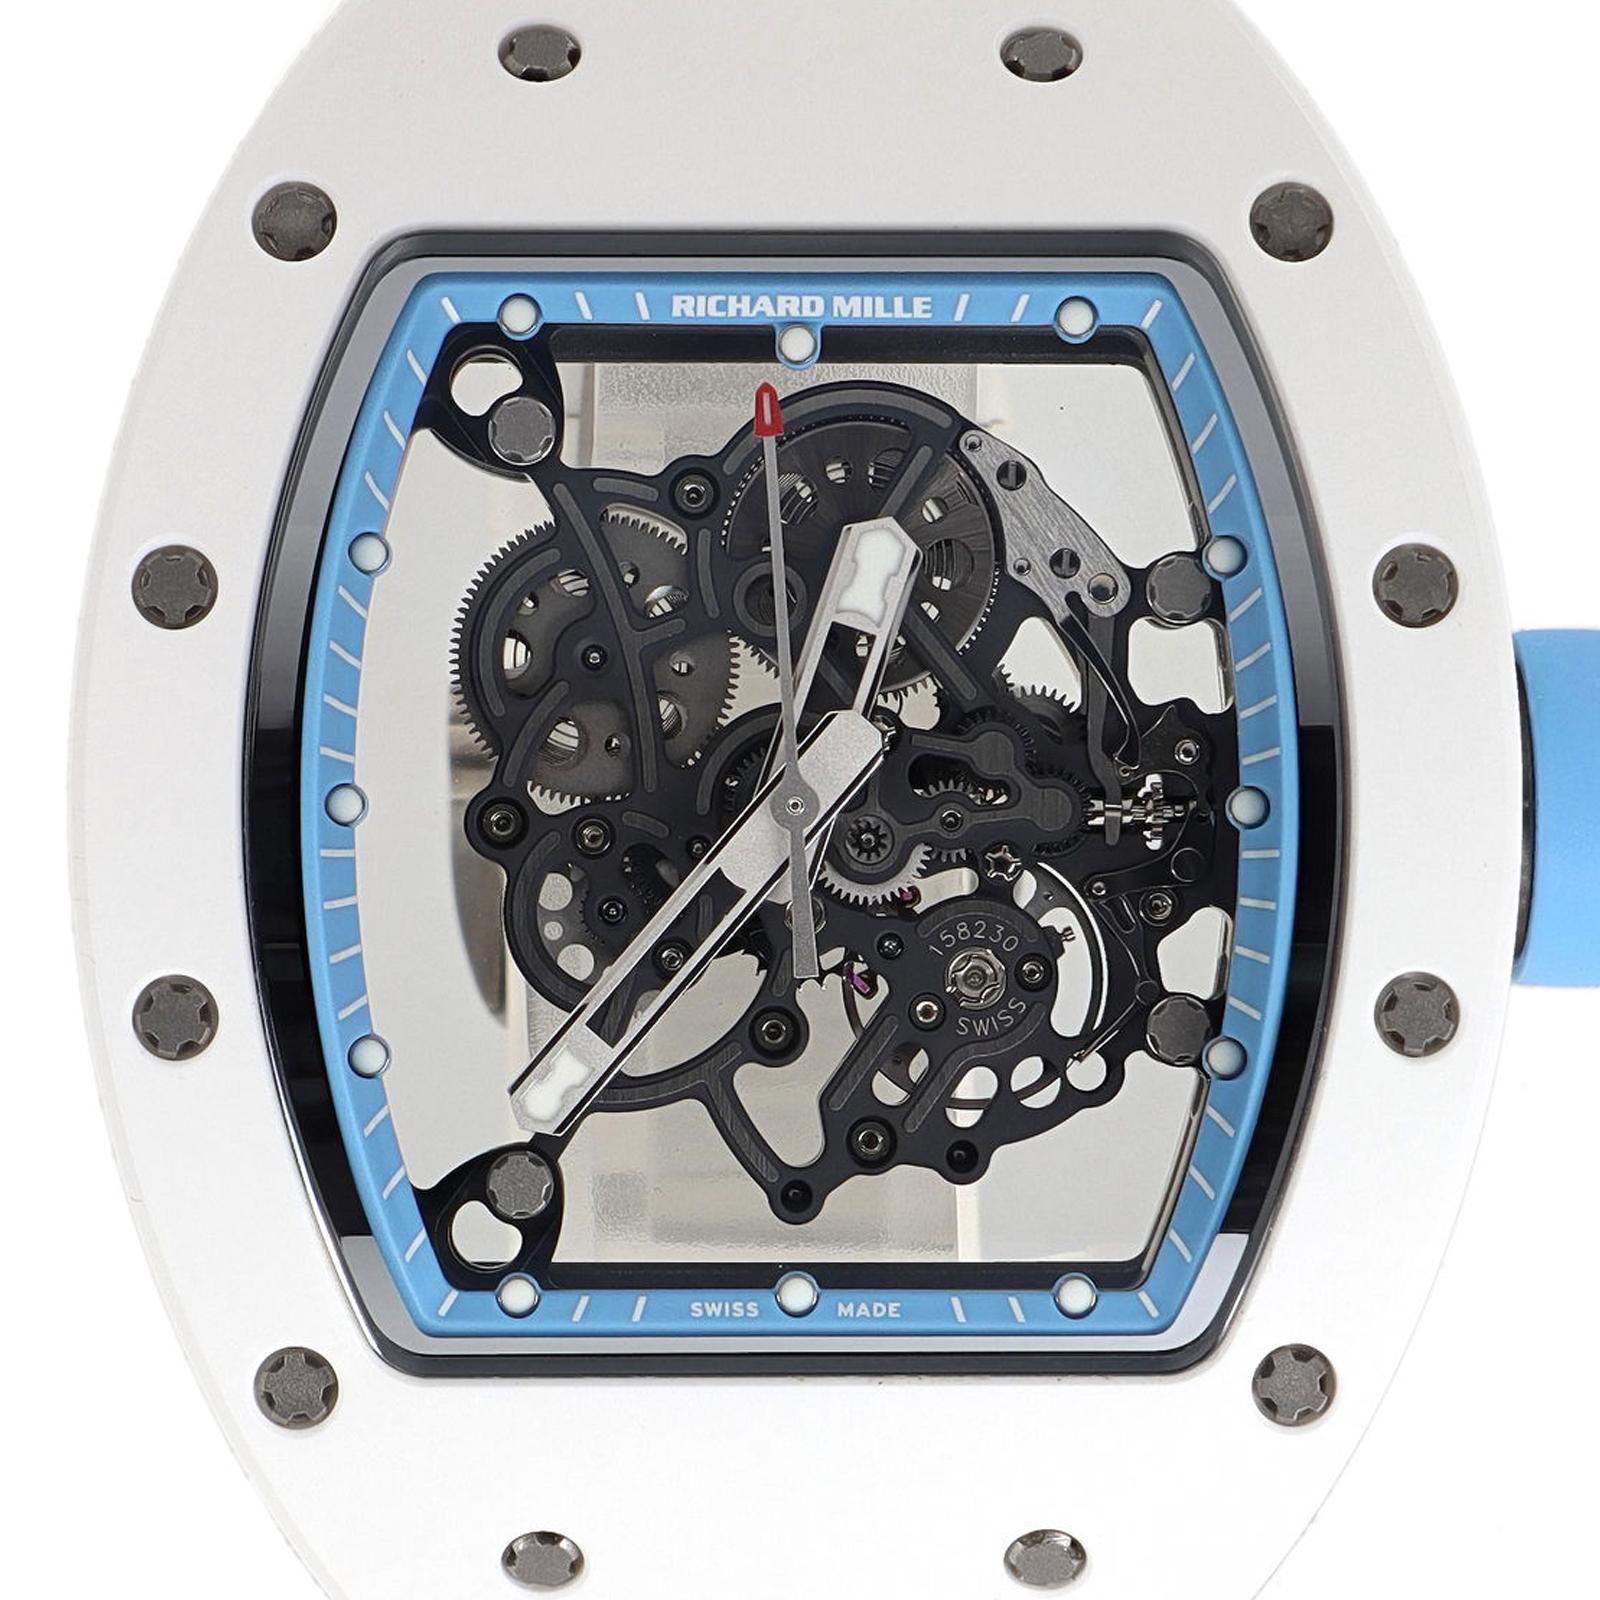 (32864)
This pre-owned Richard Mille RM 055 is a beautiful men's timepiece that is powered by a mechanical movement which is cased in a ceramic case. It has a tonneau shape face, tourbillon dial and has hand dots style markers. It is completed with